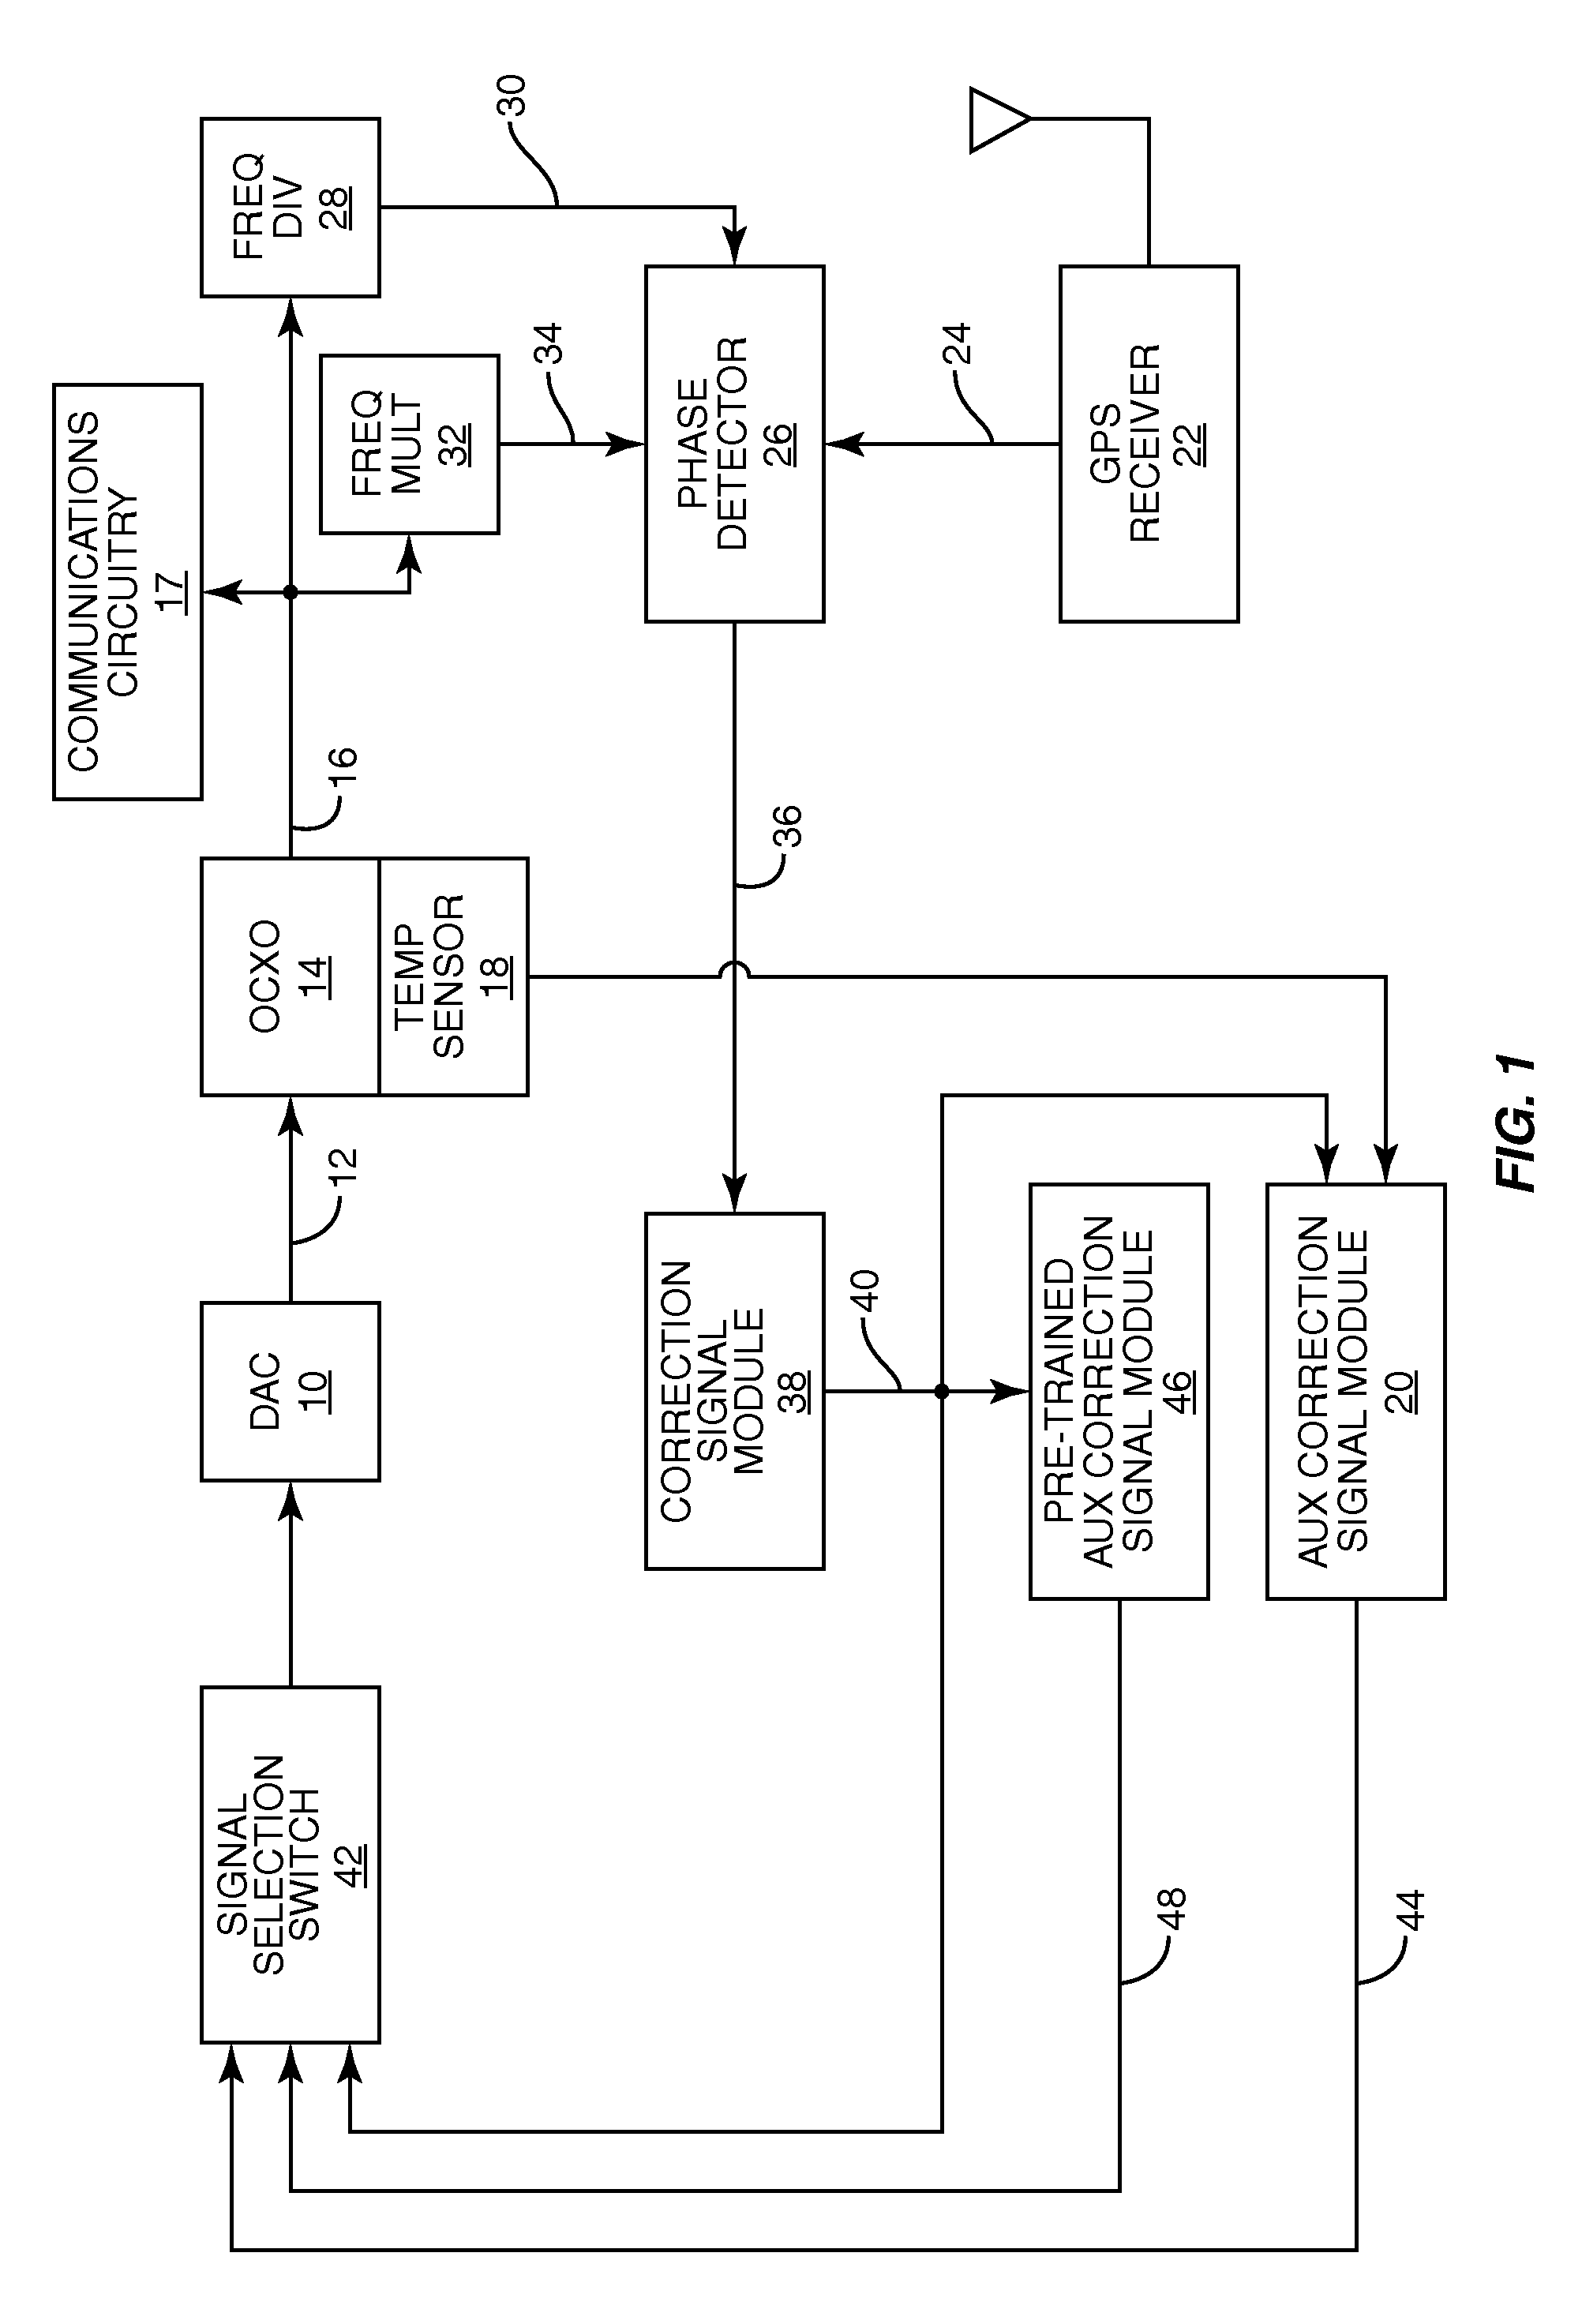 Method and system for correcting oscillator frequency drift